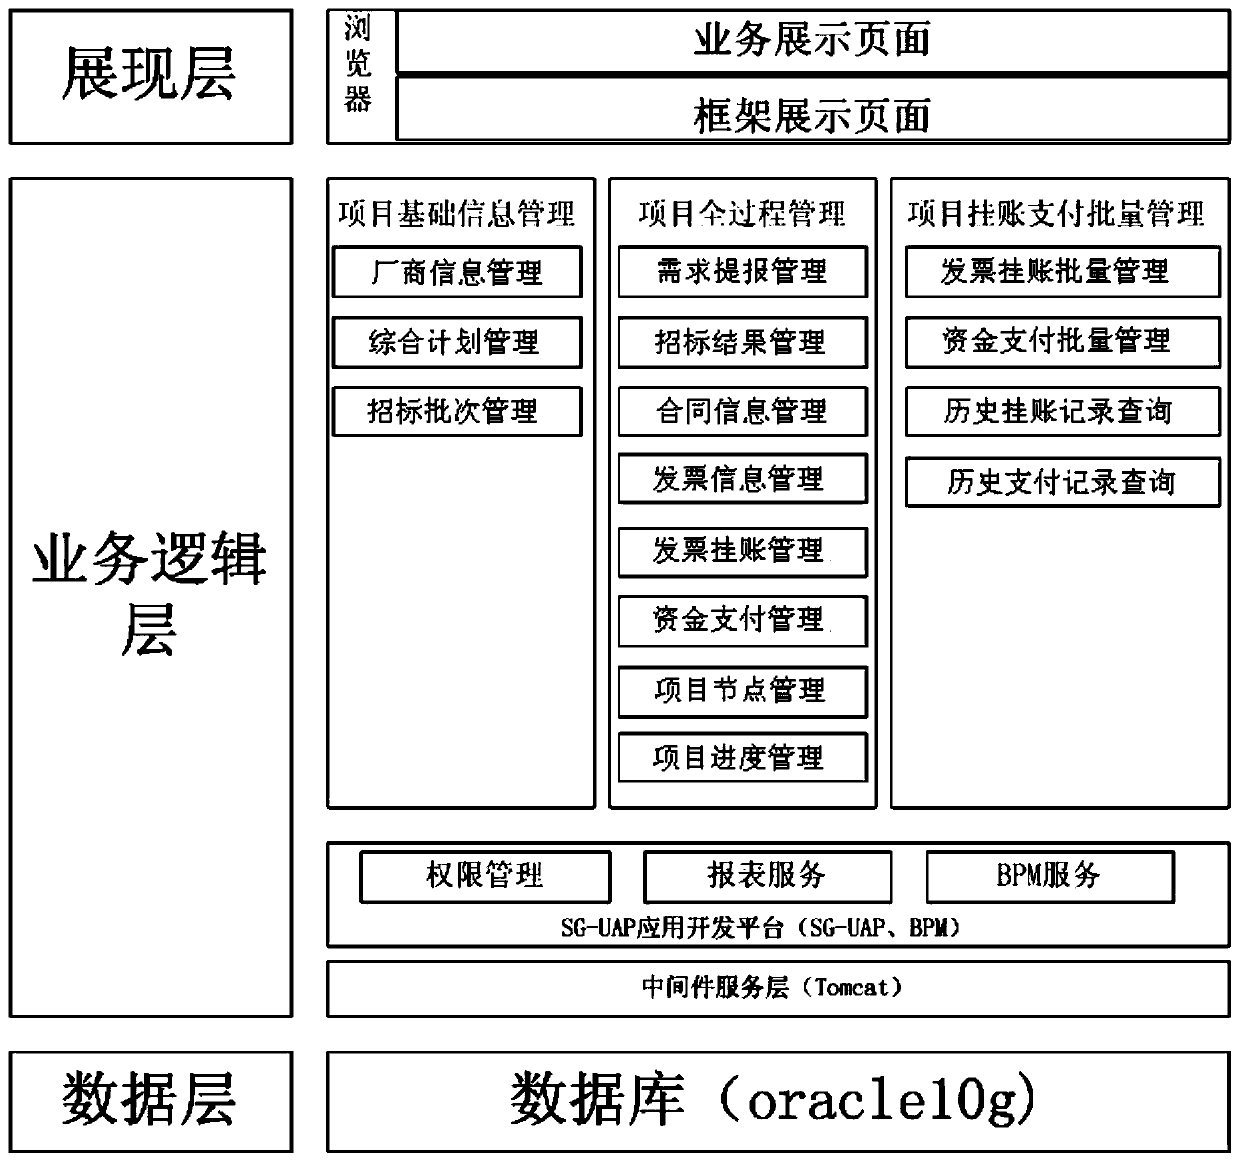 Information processing method and application of project management